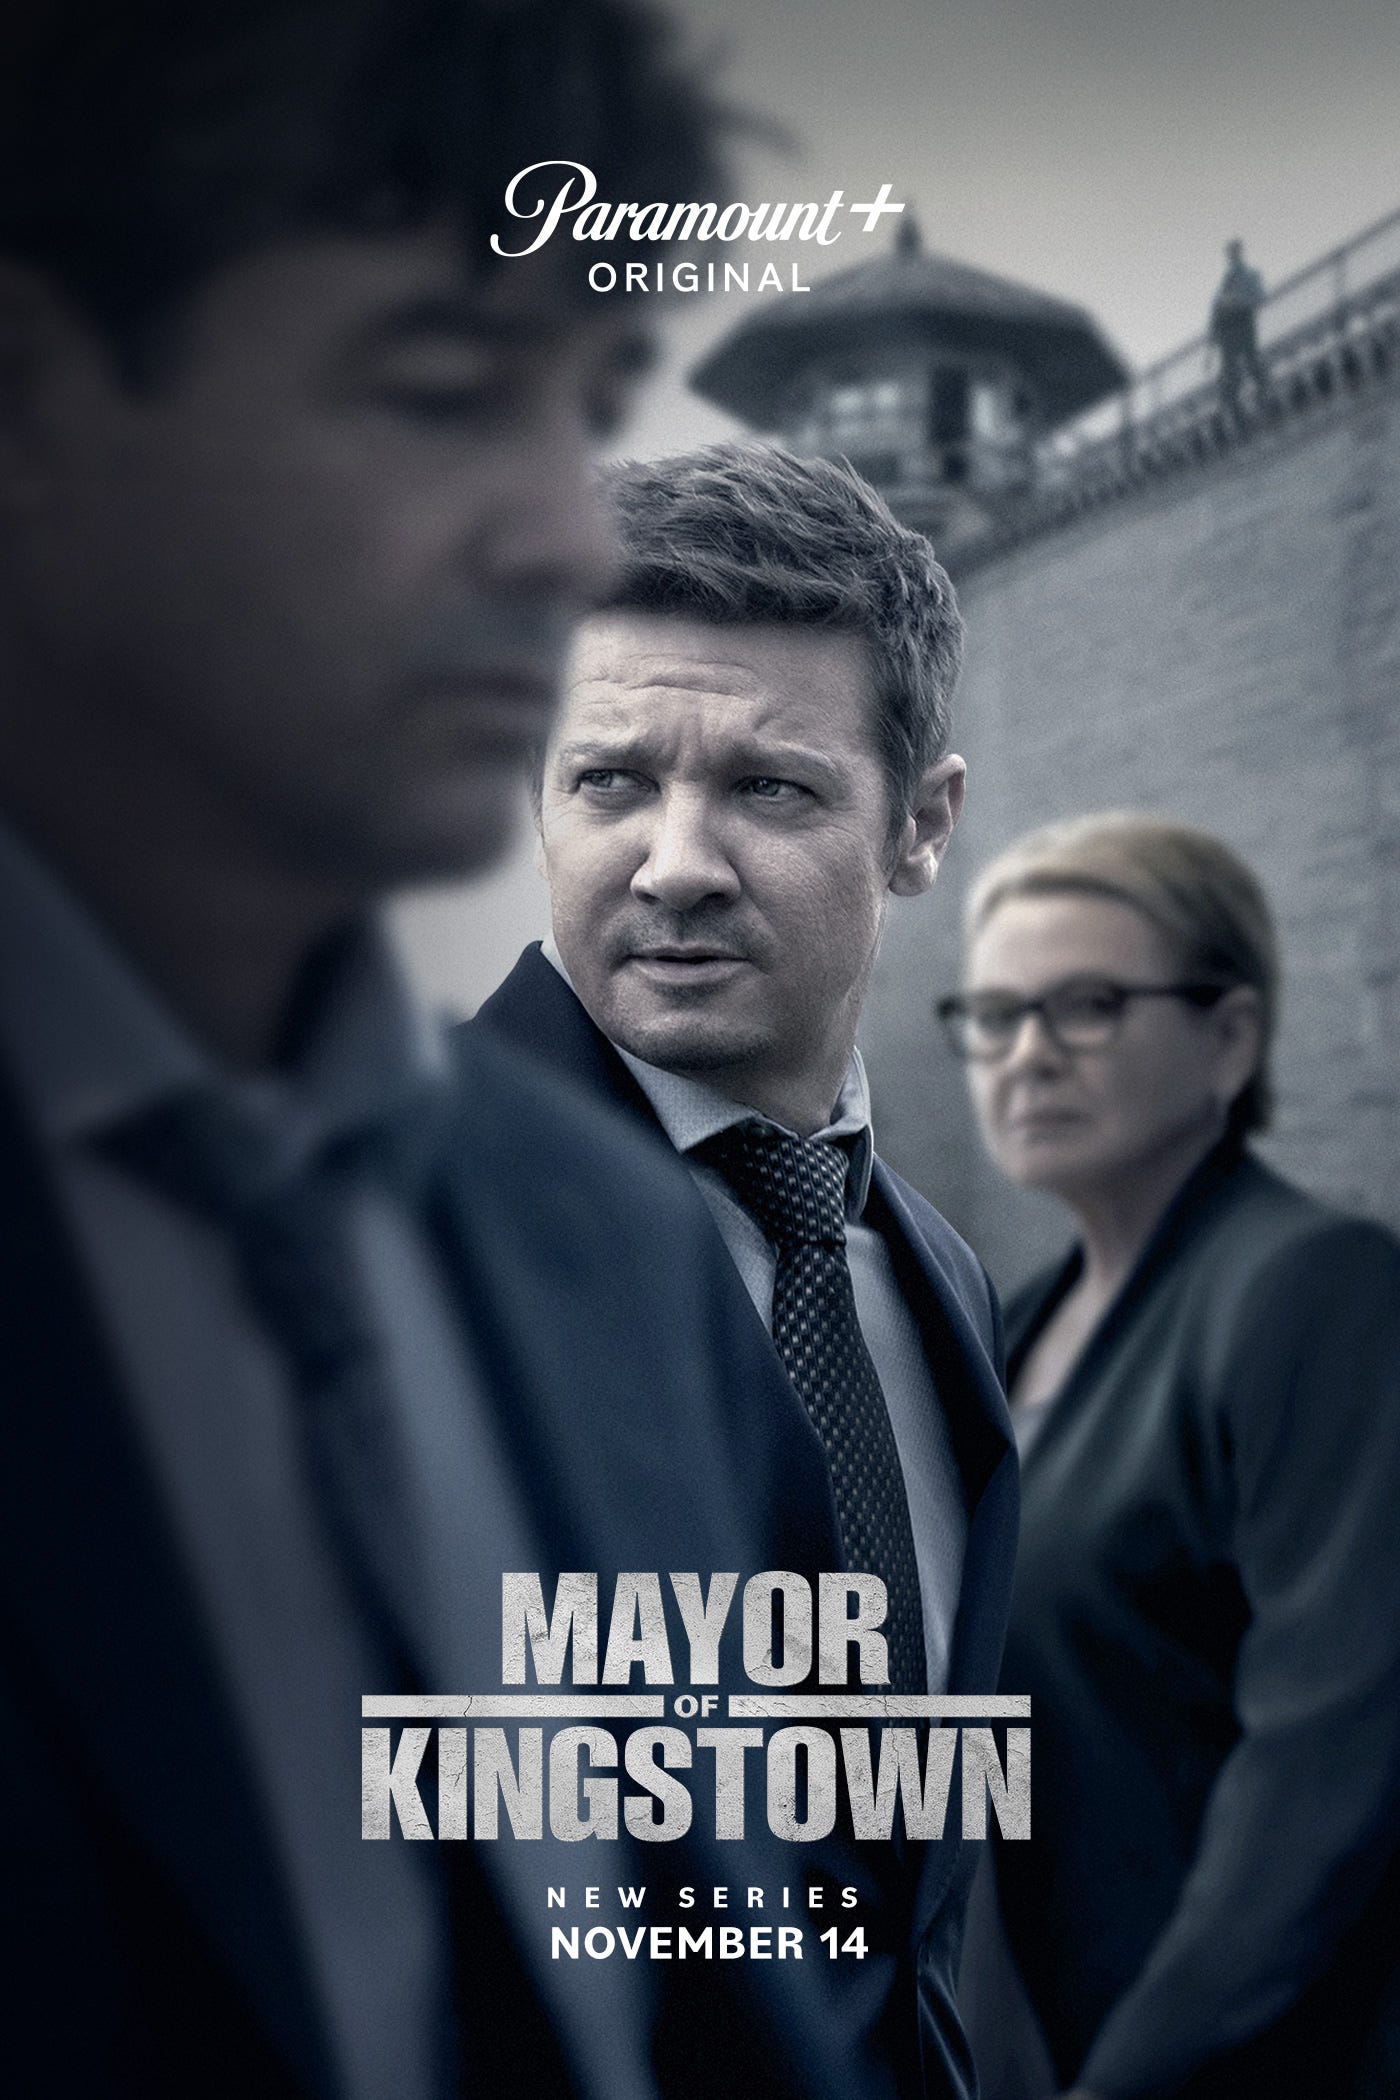 jeremy Renner Is Mayor Of Michigan Town In Paramount Series